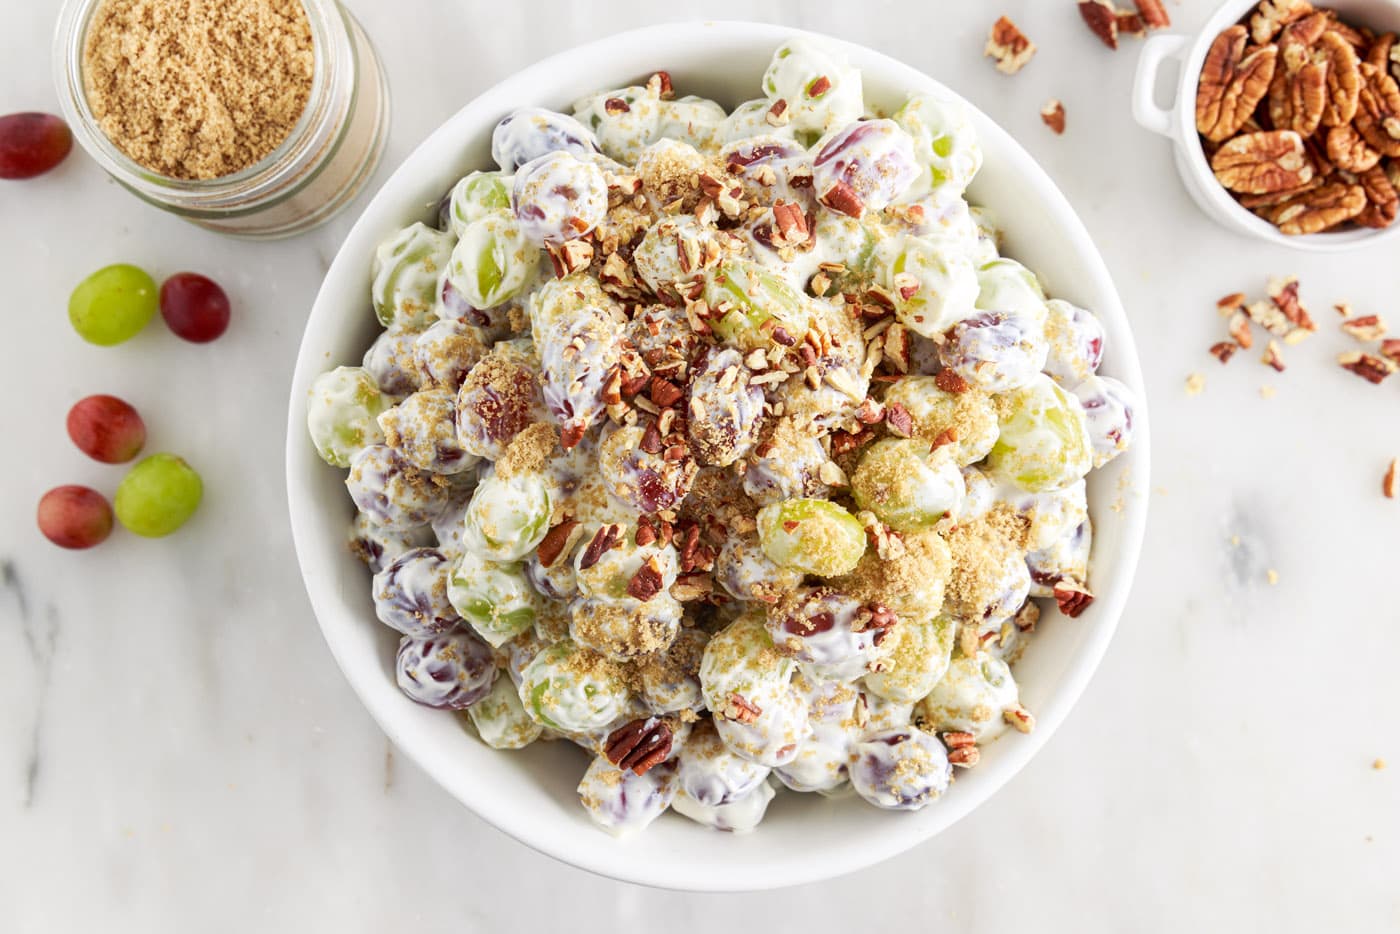 grape salad with pecans and brown sugar